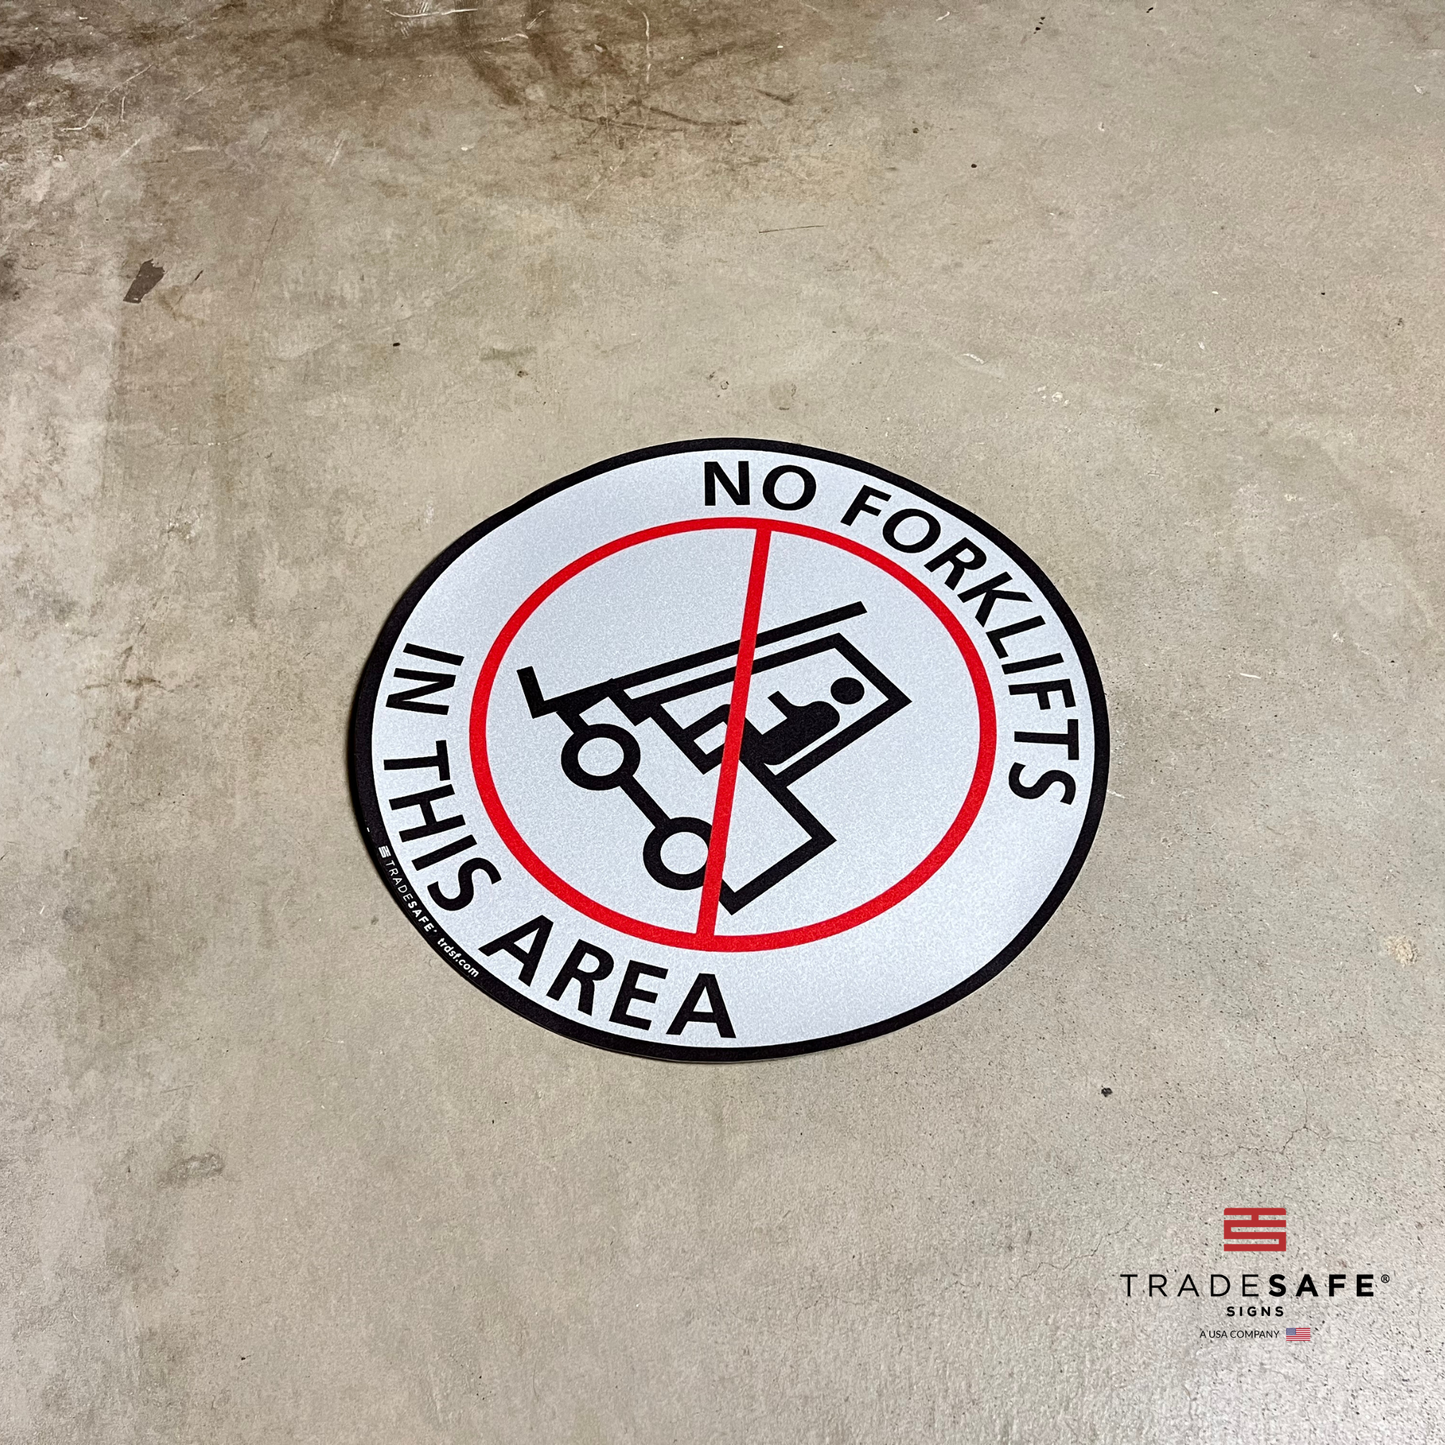 no forklifts in this area sign on floor